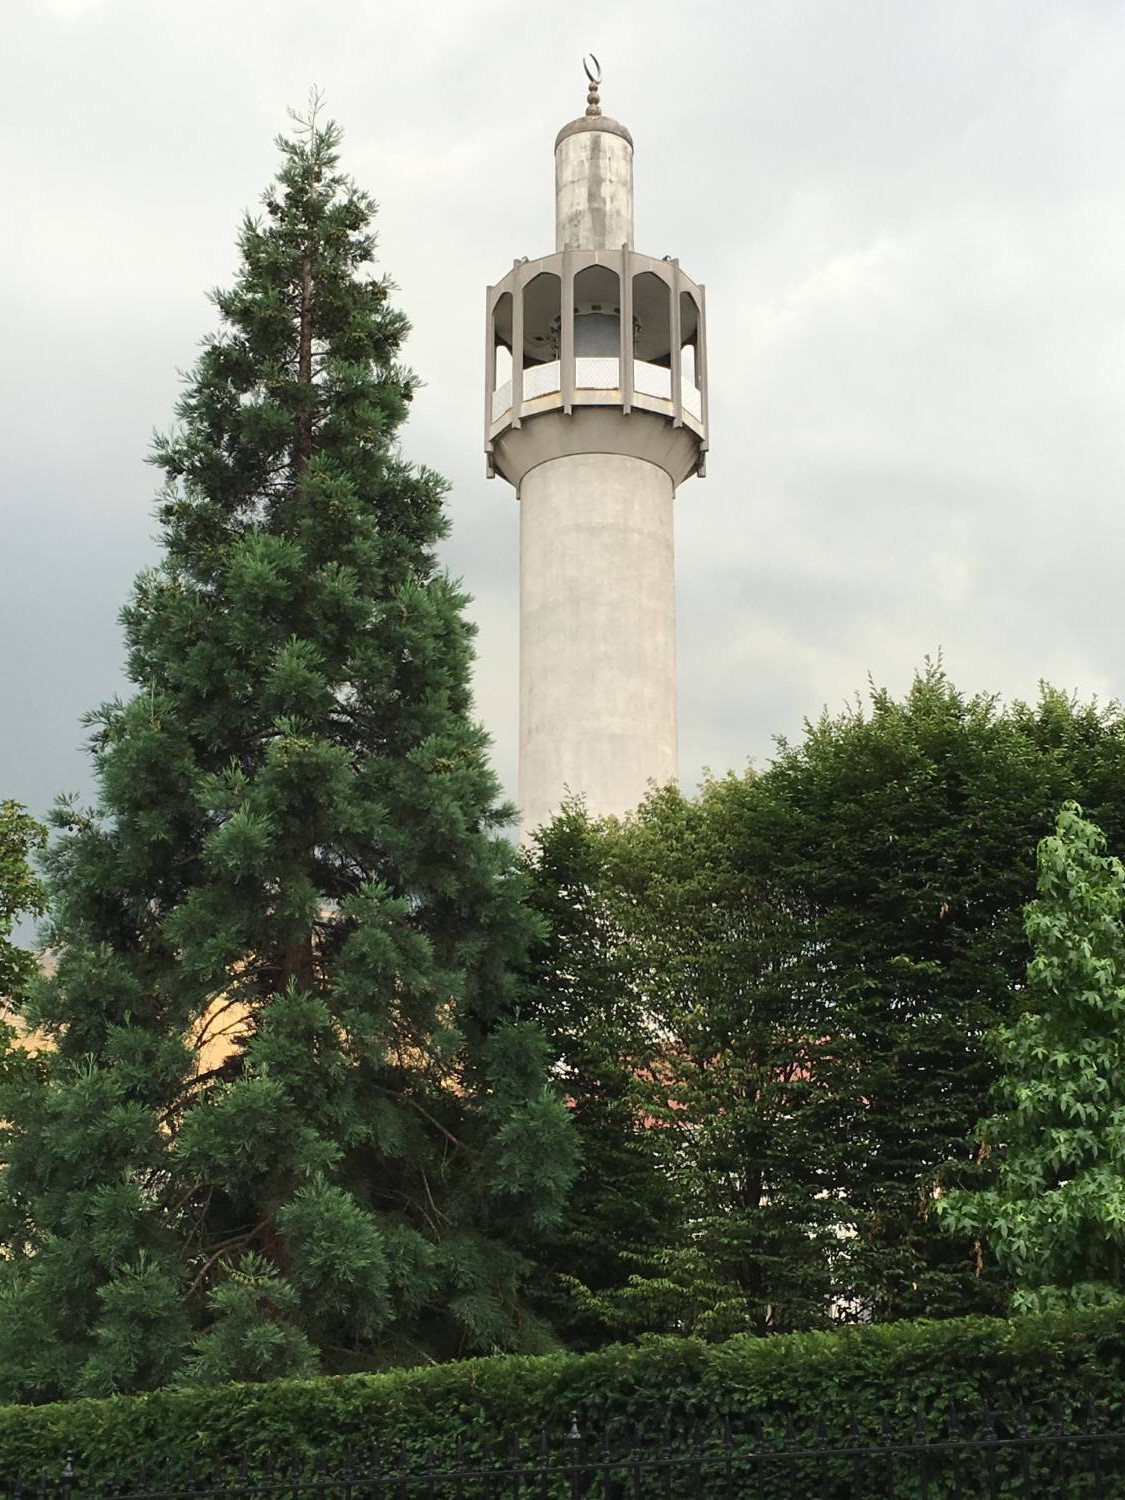 View of the minaret above the trees